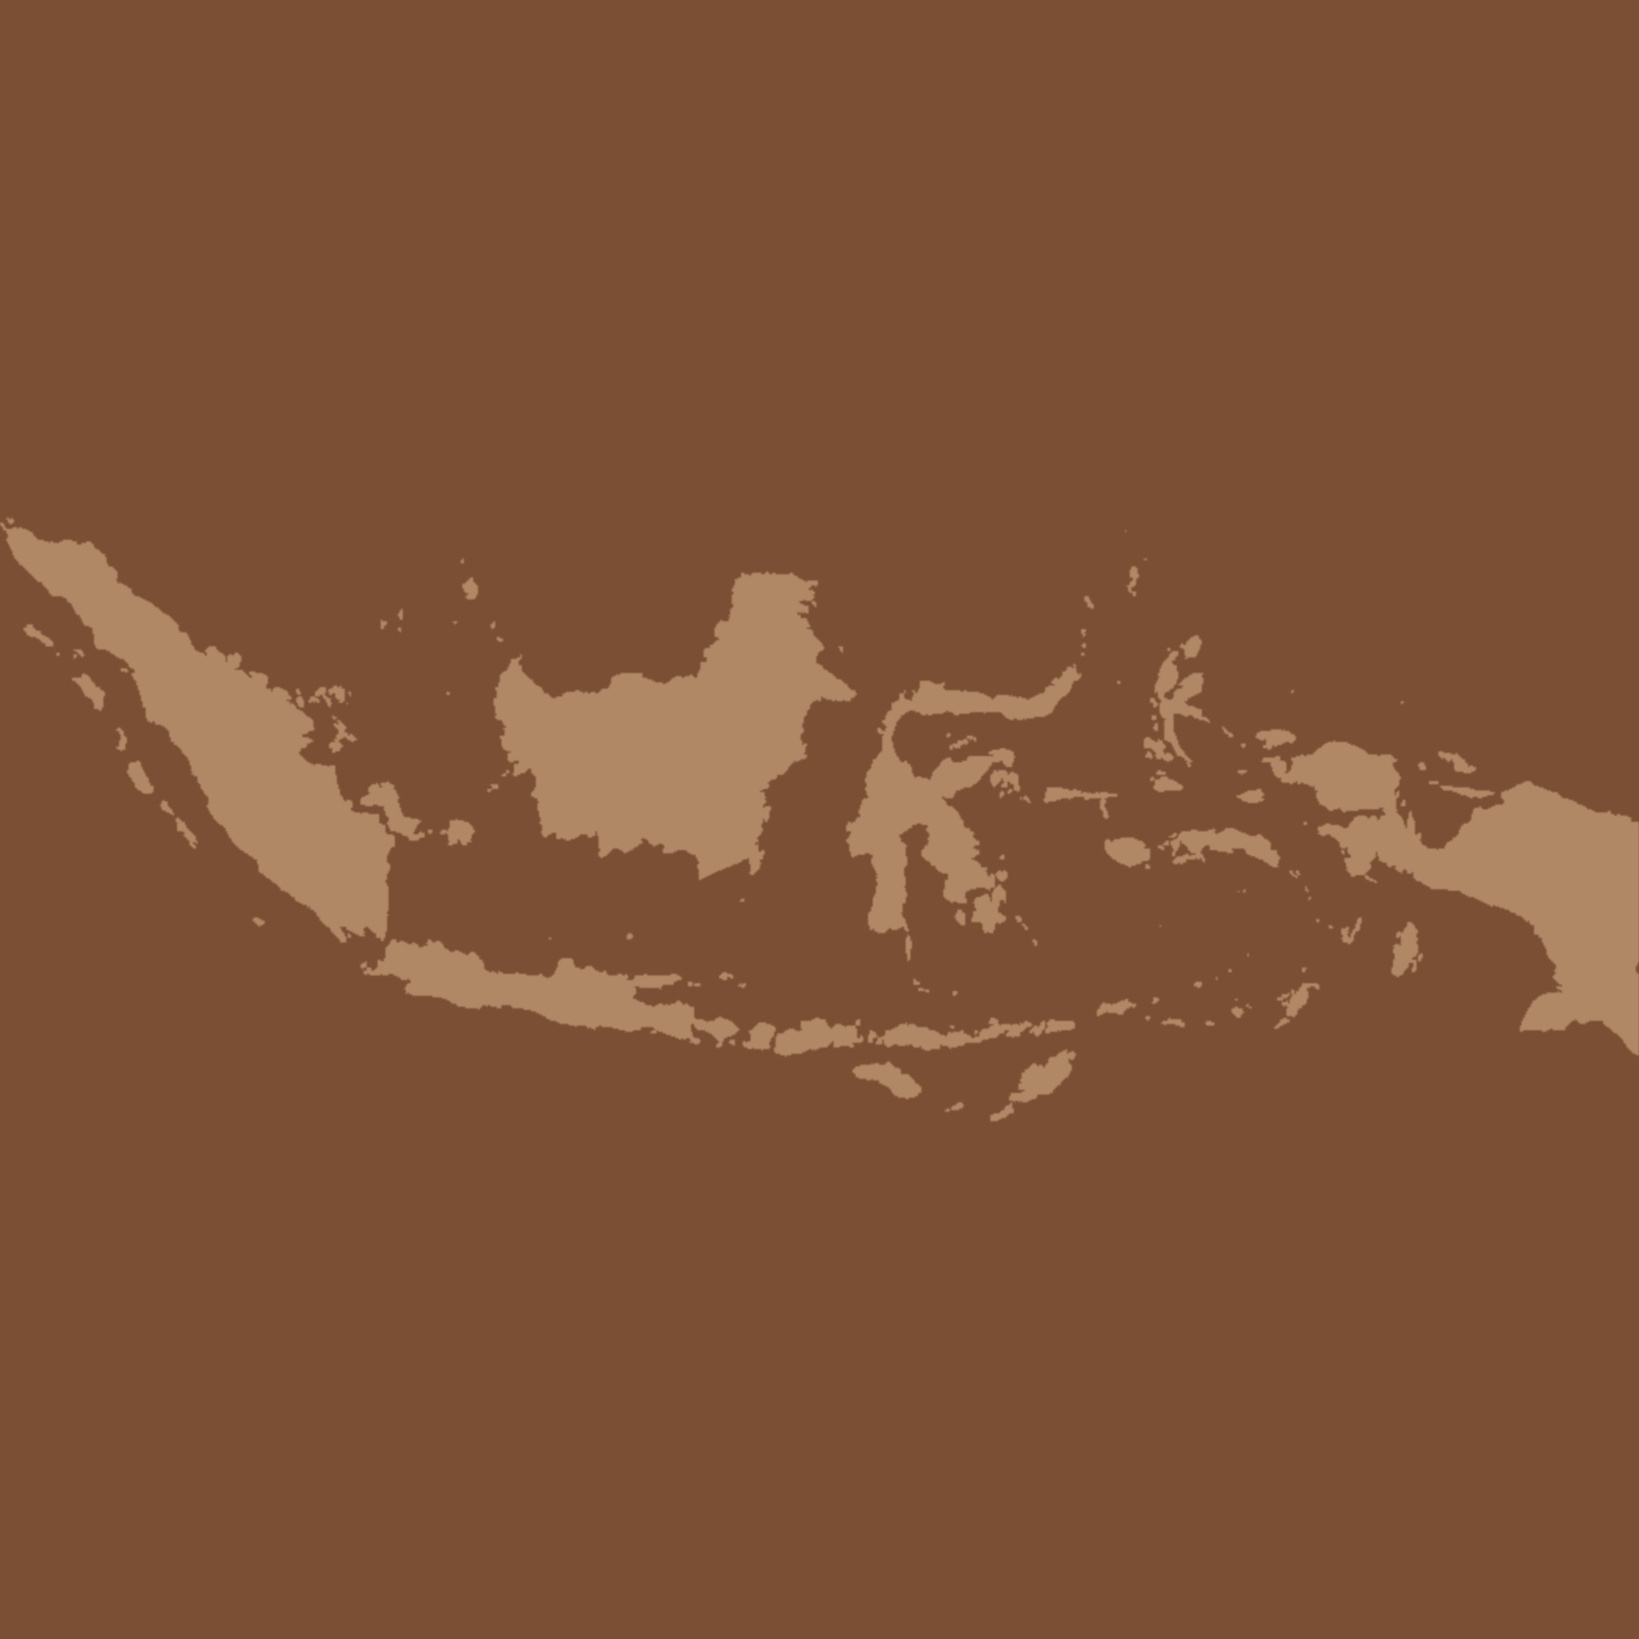 Indonesian map in brown vintage color